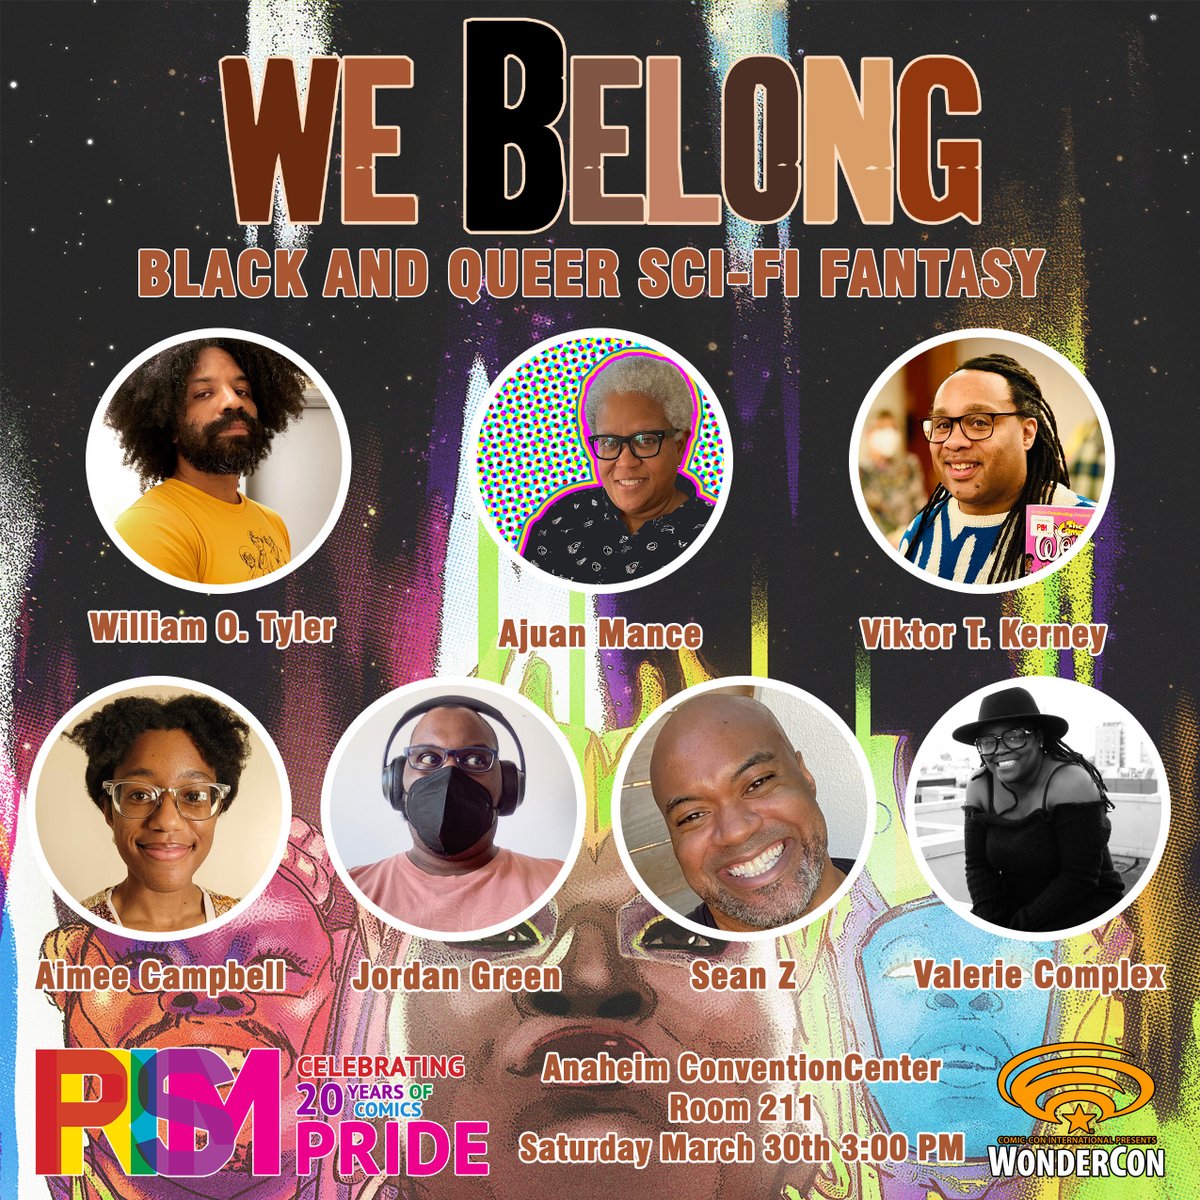 Don't miss We Belong: Black and Queer Sci-fi Fantasy Saturday March 30 at 3PM at @WonderCon! See @WilliamOTyler, @Wondermann5, @AjuanMance, @makocakess, Sean Z, @ValerieComplex, and Jordan Green discuss this groundbreaking anthology coming soon from @stackeddeckprss!